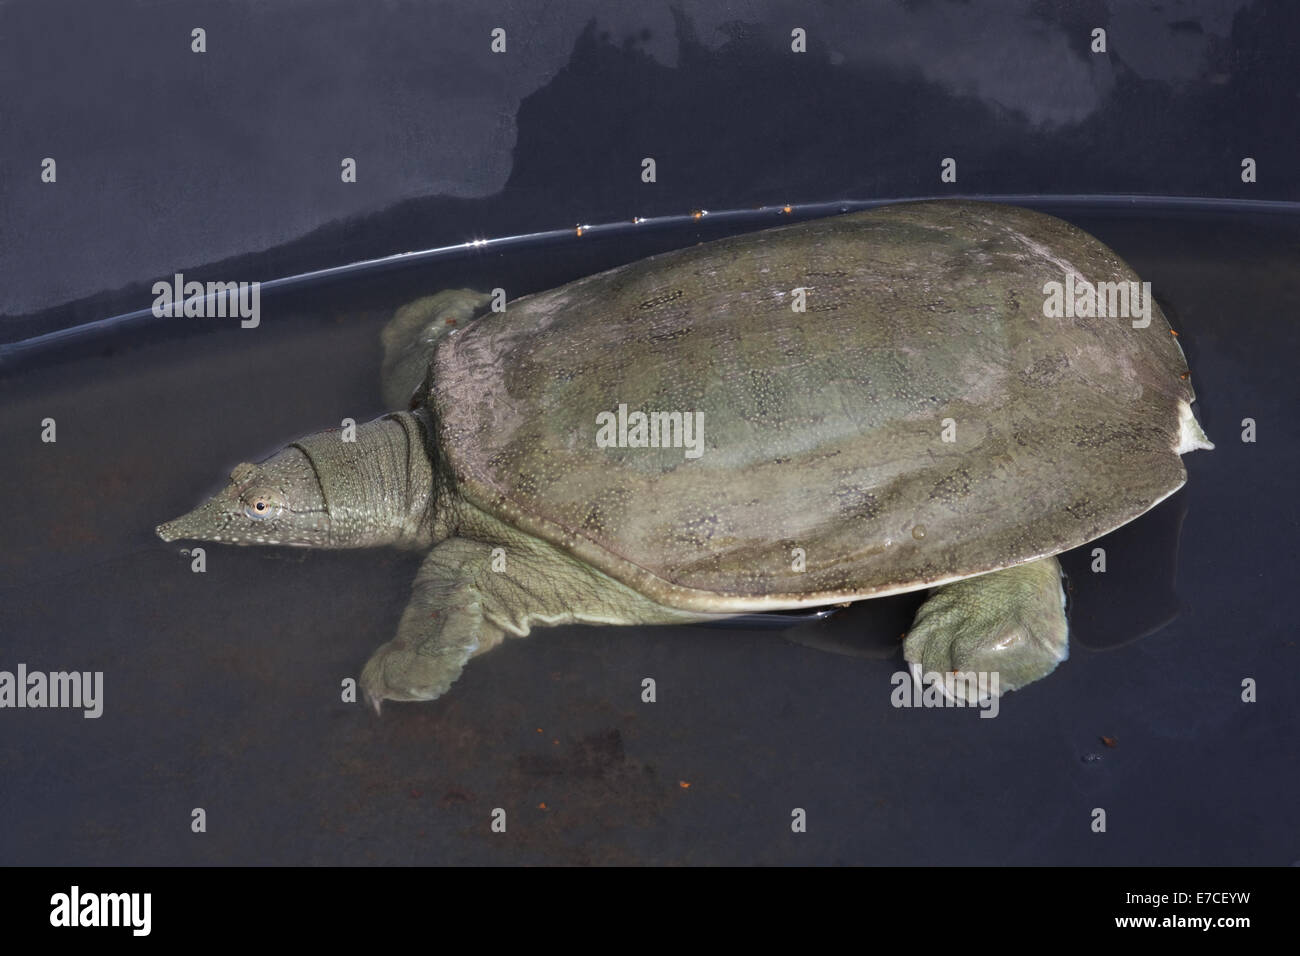 Chinese Softshell Turtle (Pelodiscus sinensis). In a container. Showing upper shell or carapace markings. Farmed for human food. Stock Photo